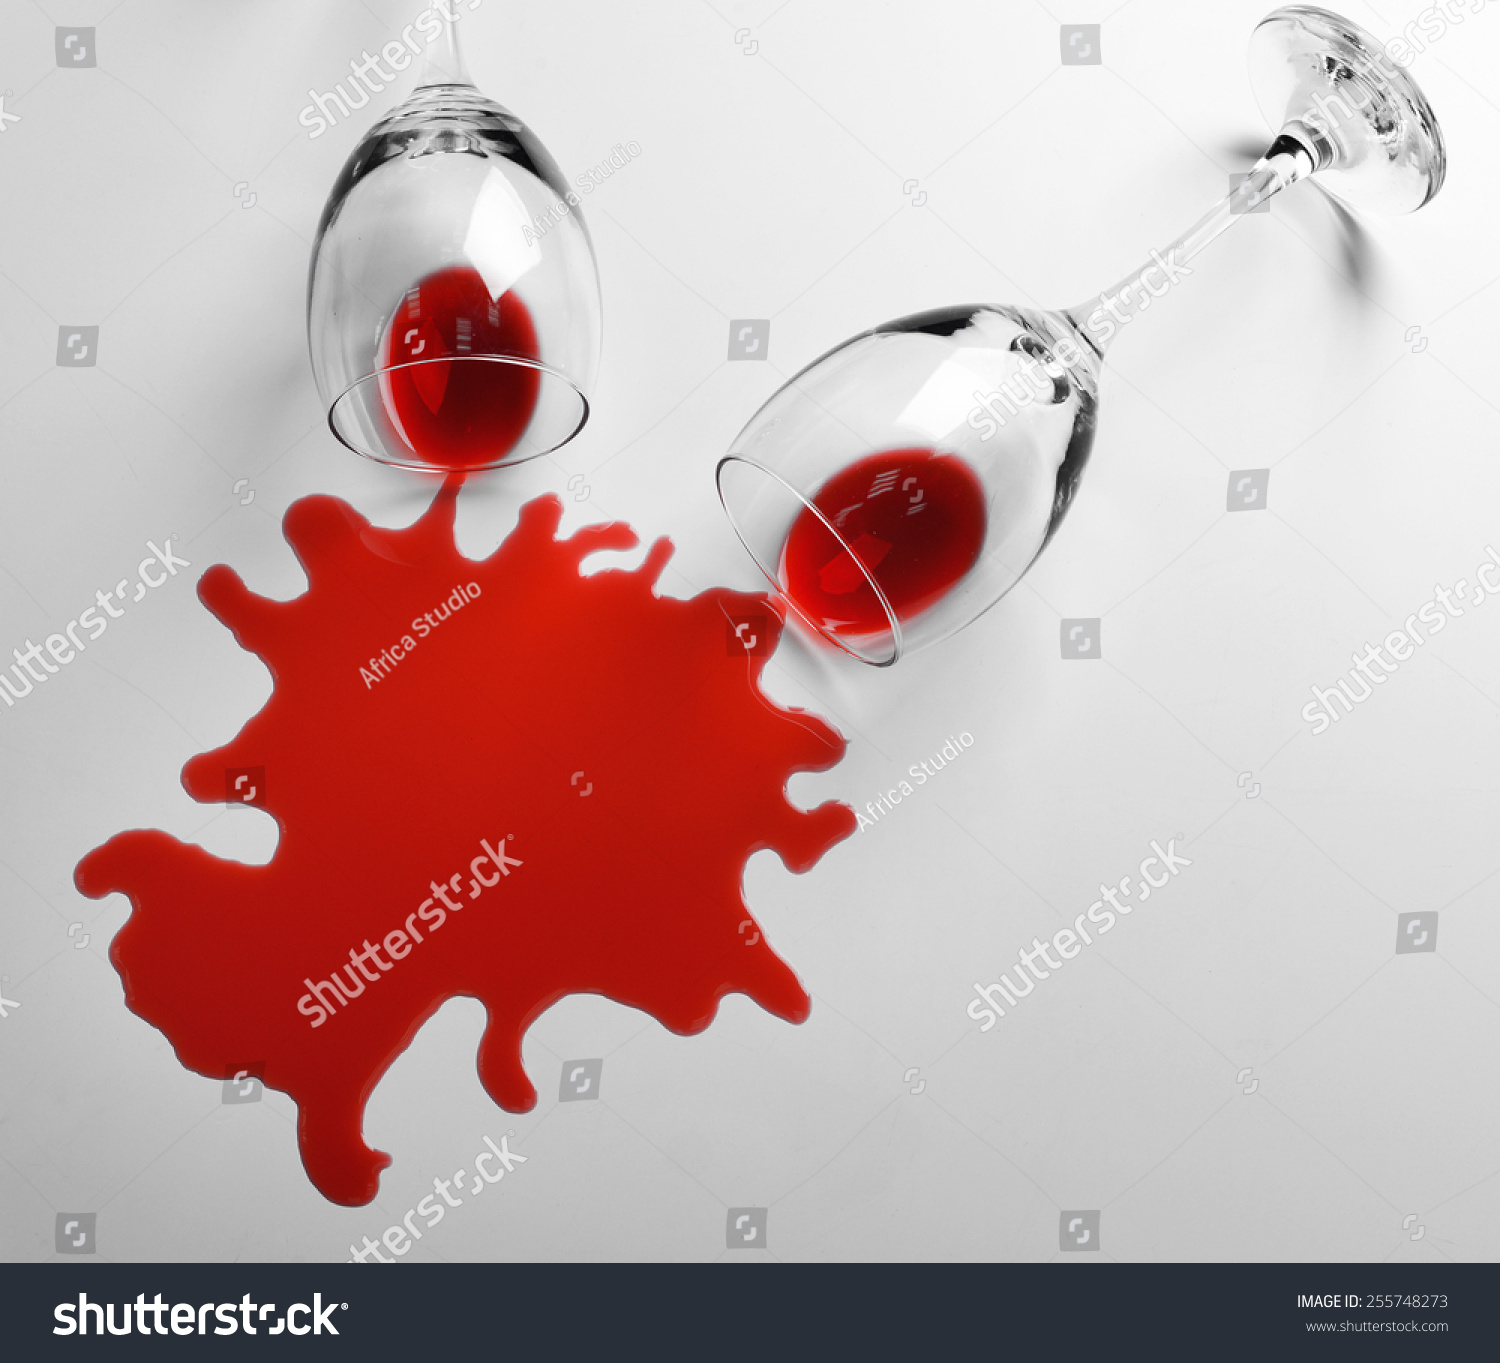 Red Wine Spilled Glass On White Stock Photo 255748273 - Shutterstock